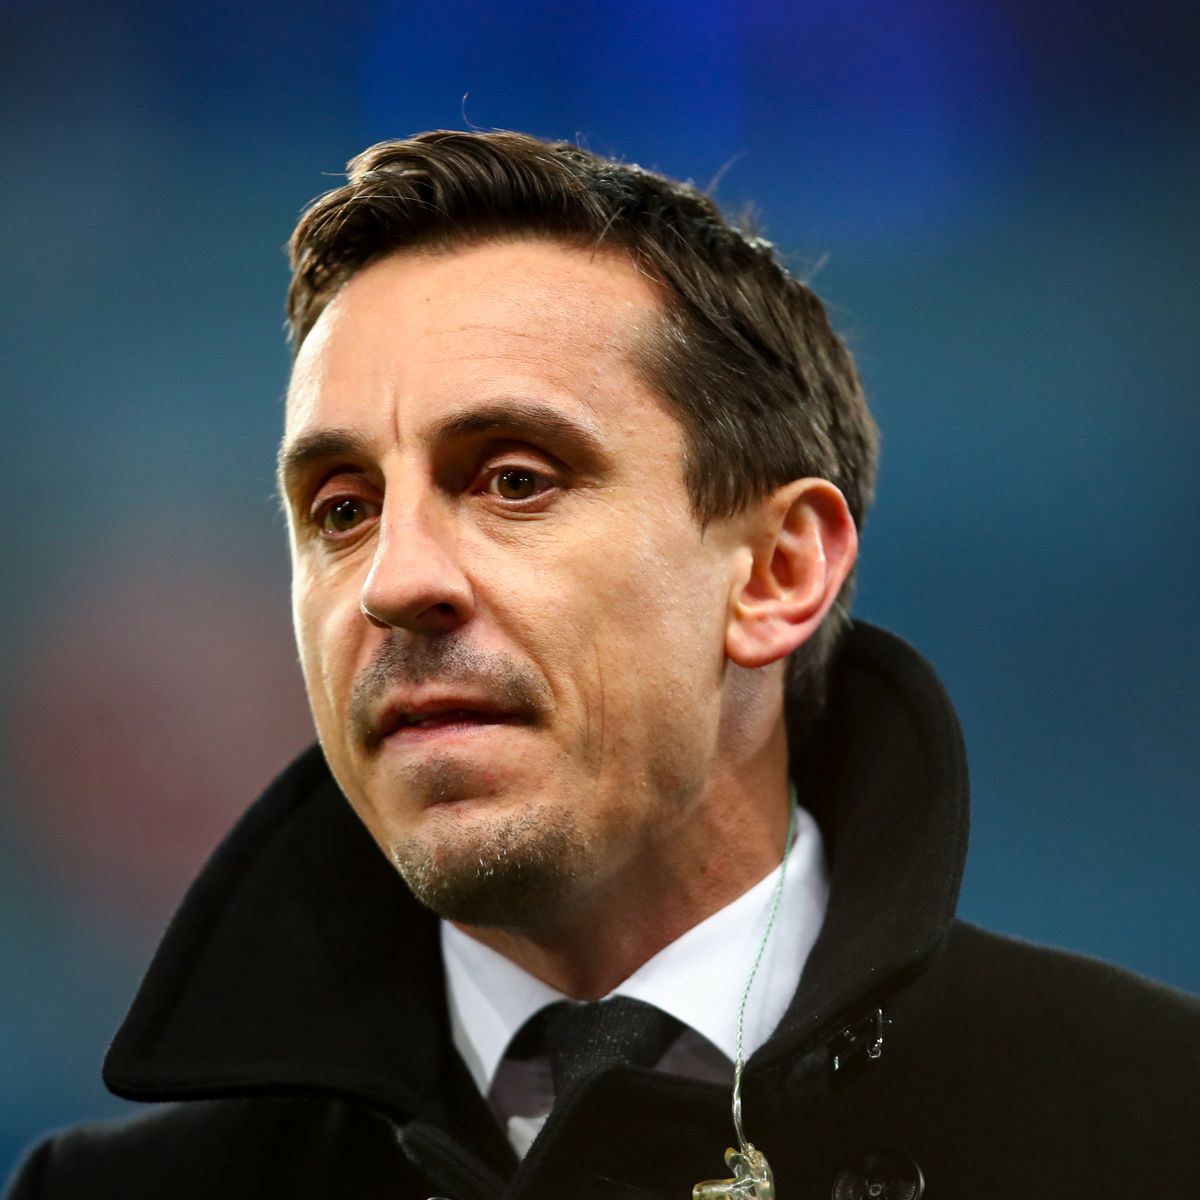                      Gary Neville has stated facts regarding the club's current situation and solution